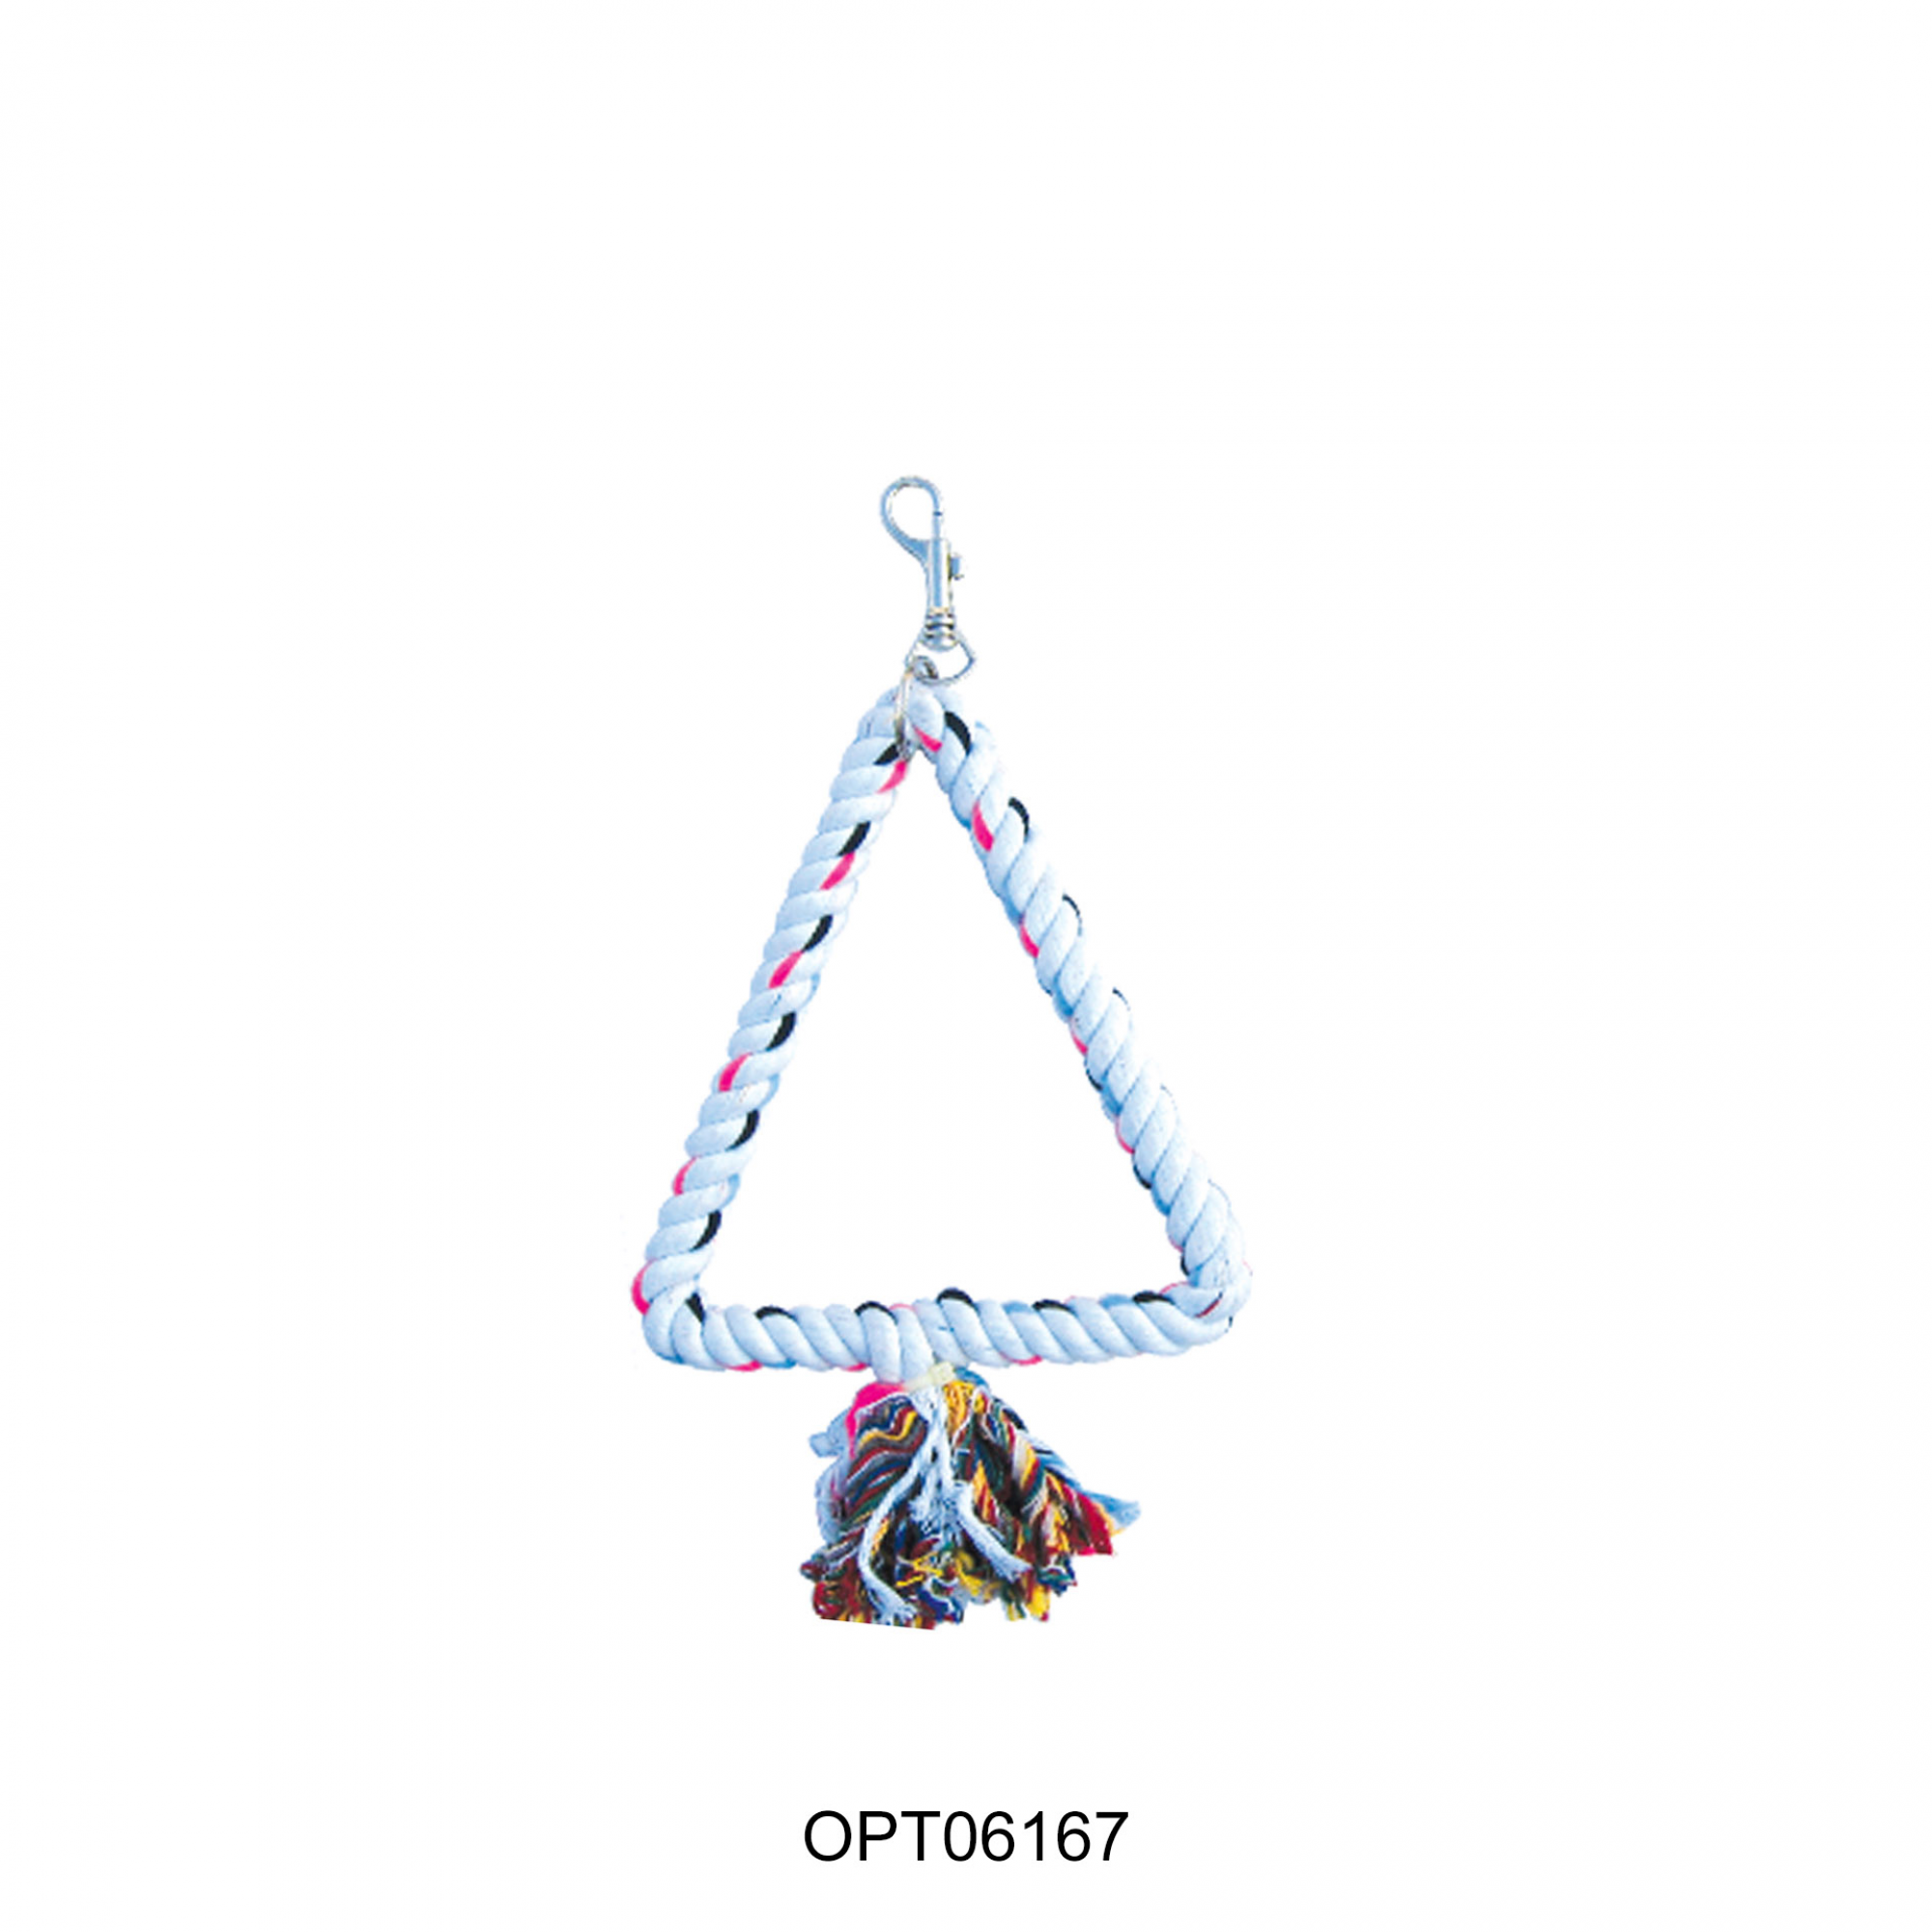 OPSP - 6167 - Triangle Shaped Rope Bird Toy 11